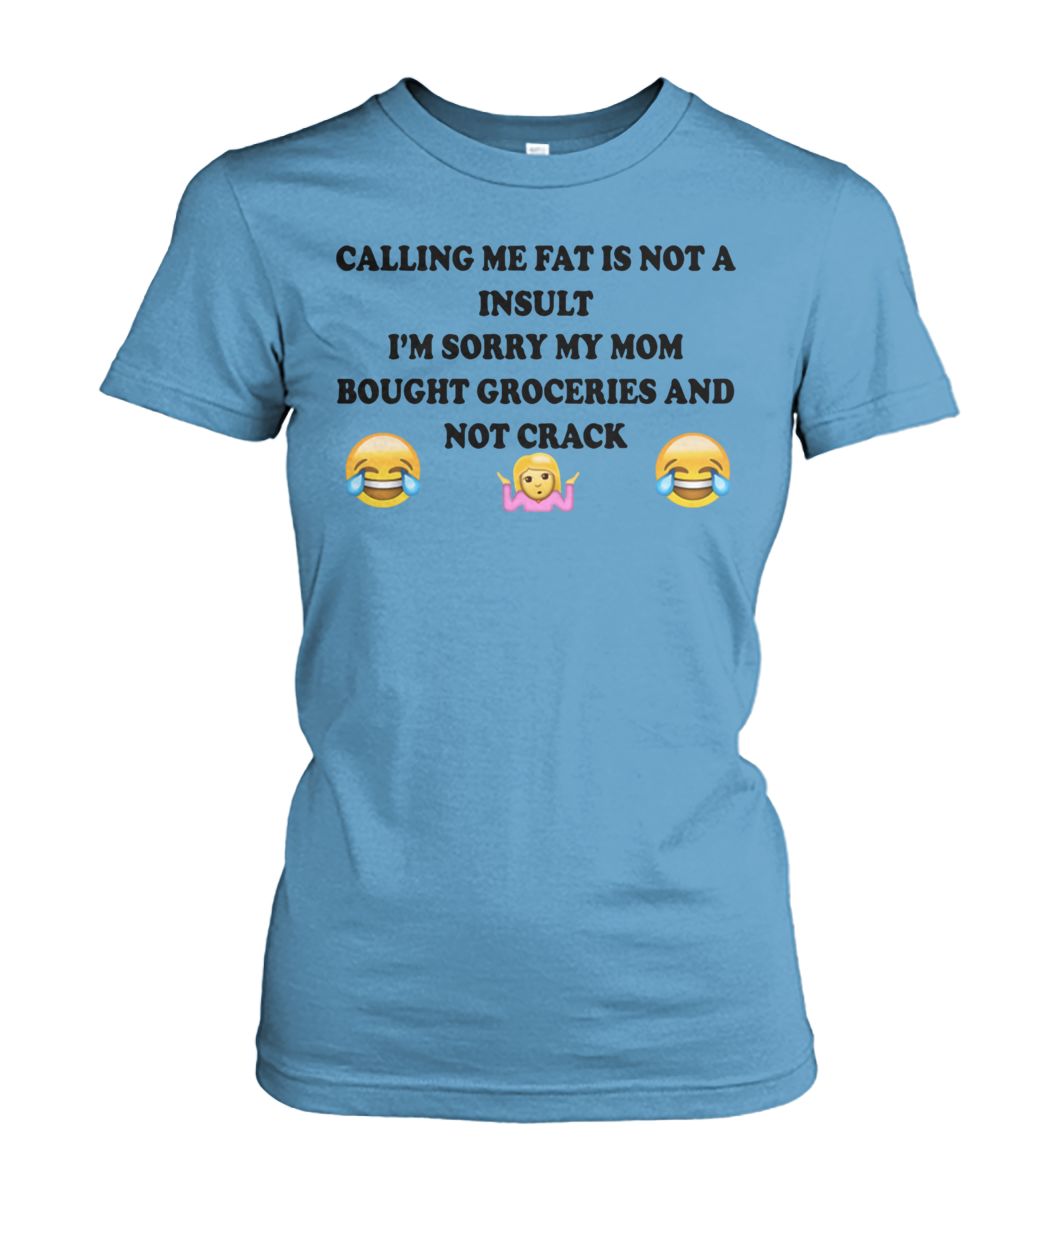 Calling me fat is not a insult I’m sorry my mom bought groceries and not crack women's crew tee